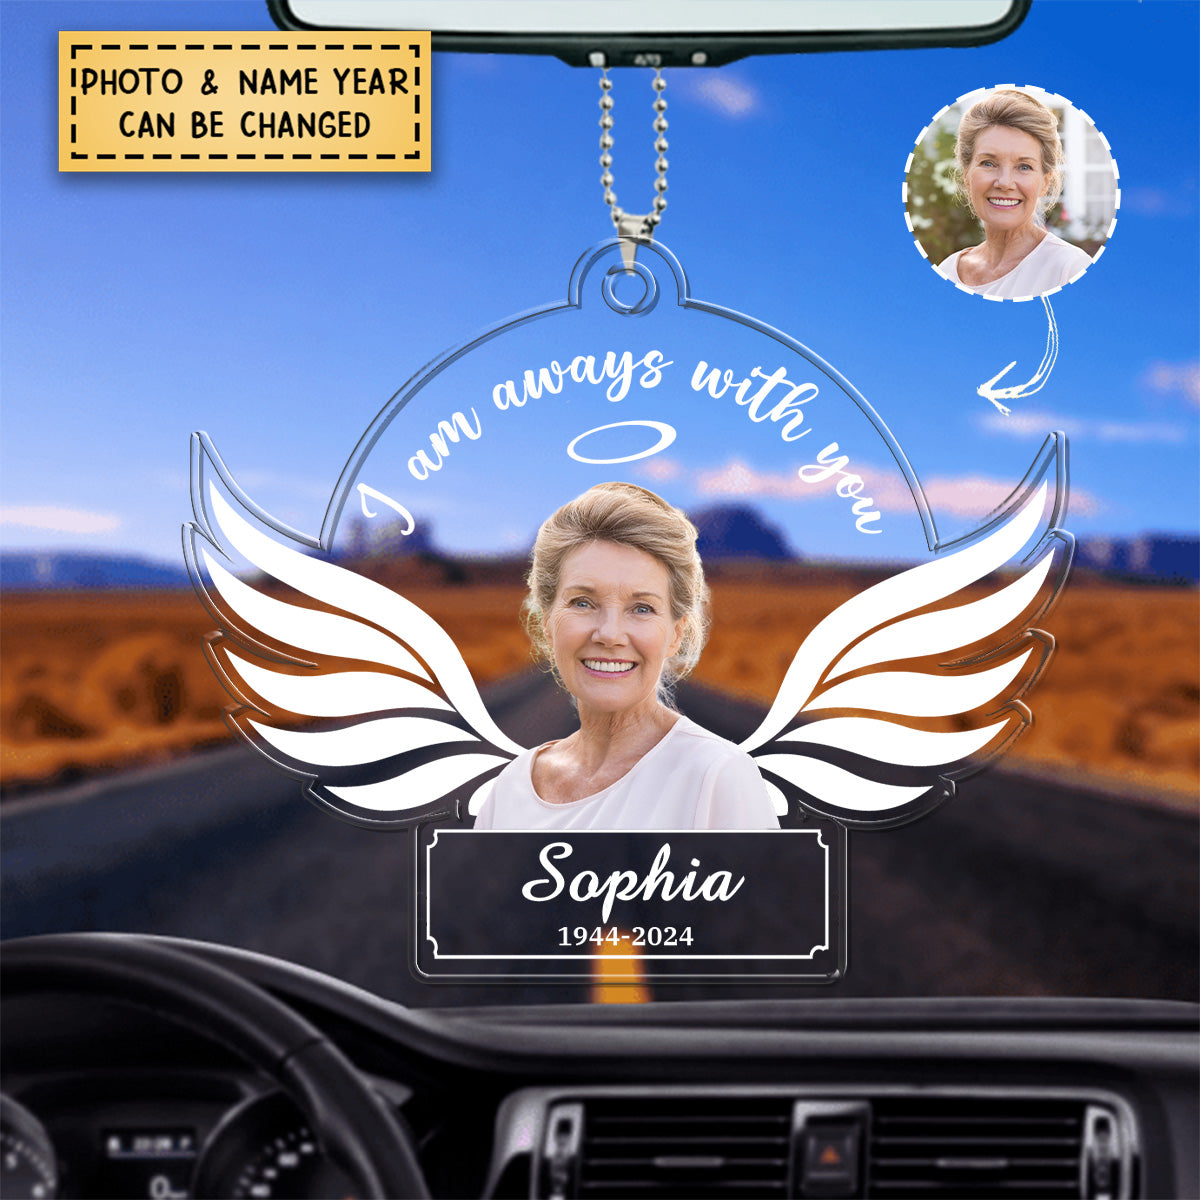 I Am Always With You Personalized Acrylic Car Ornament